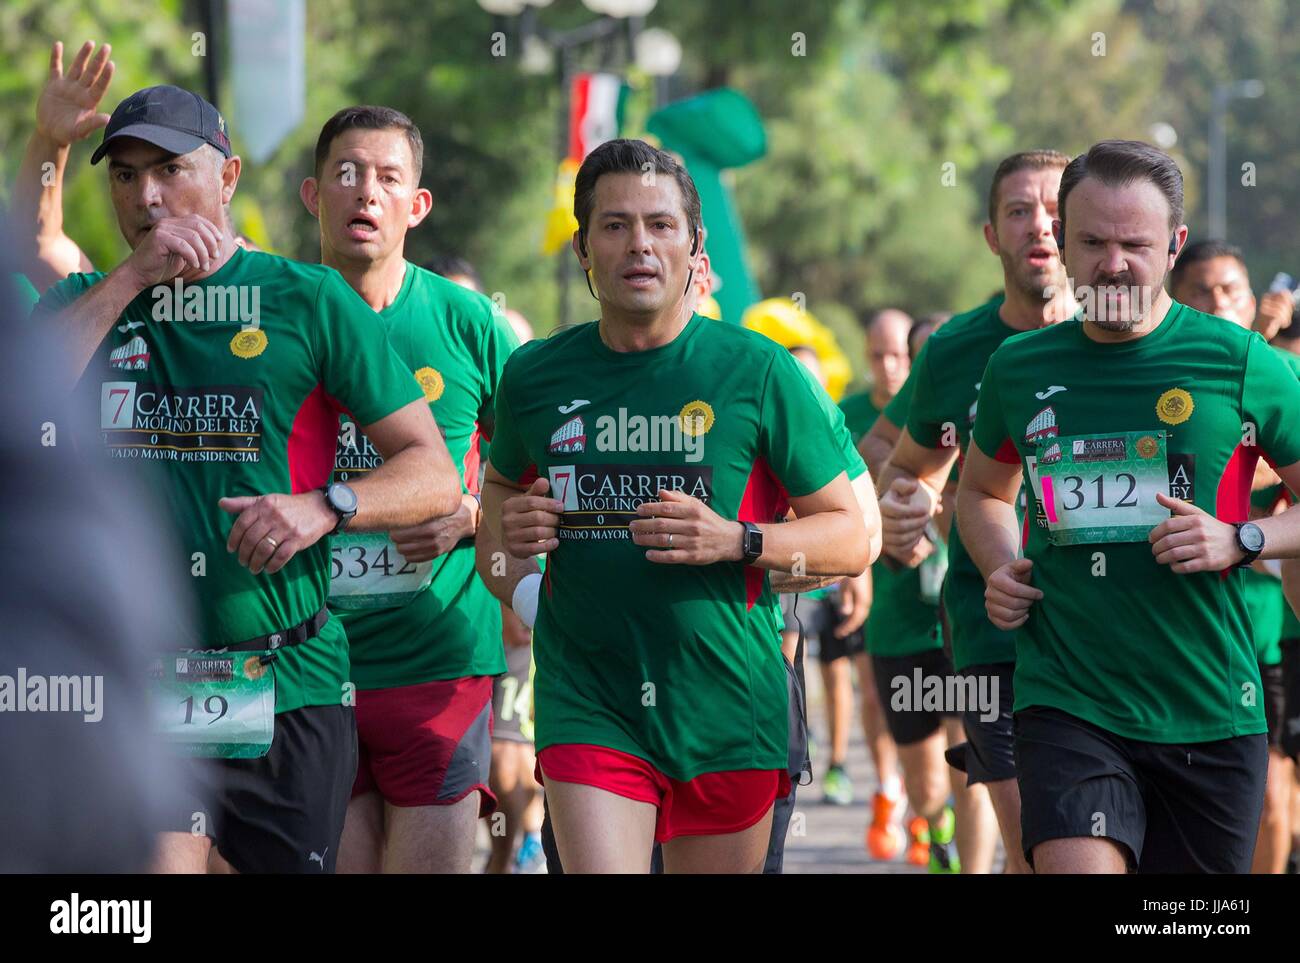 Mexico City, Mexico. 17th July, 2017. Mexican President Enrique Pena Nieto, center, takes part in the 7th Molino del Rey race in the forest of Chapultepec July 17, 2017 in Mexico City, Mexico. (presidenciamx via Planetpix) Stock Photo